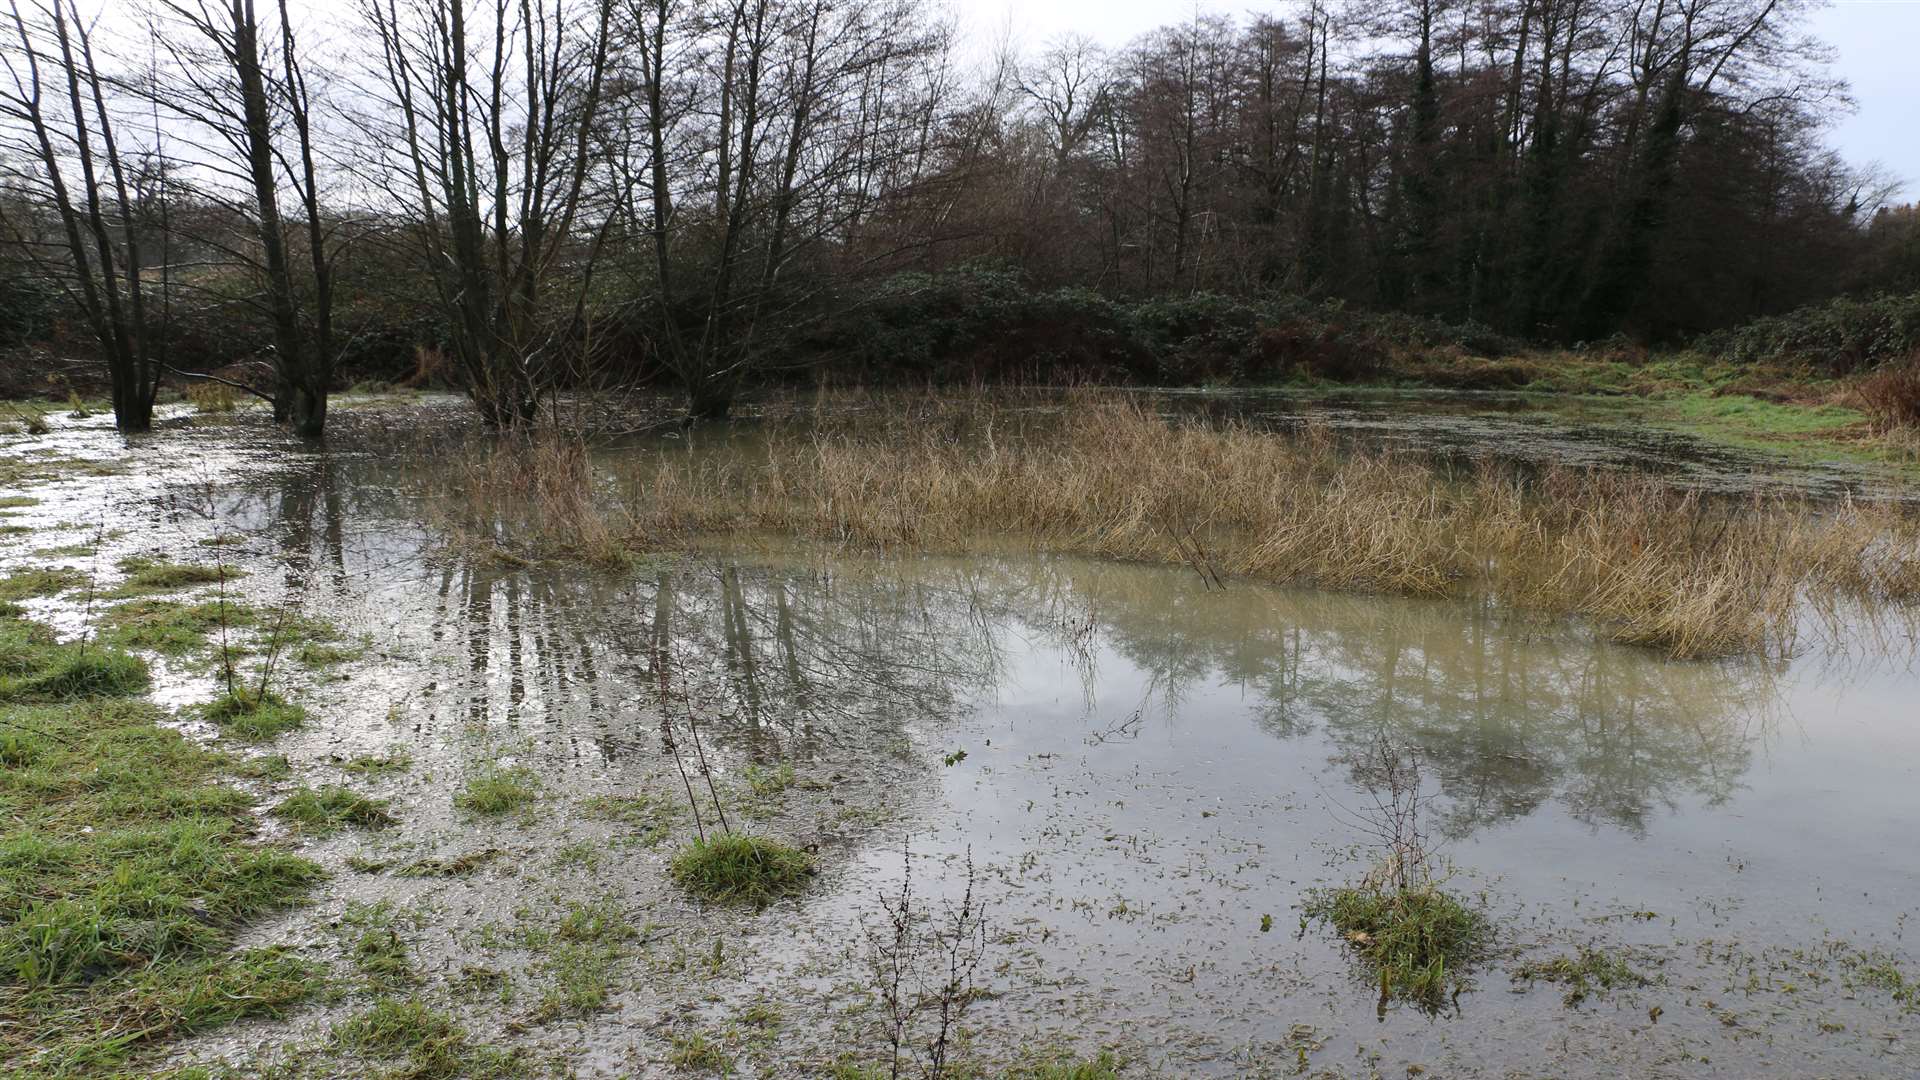 The Lilk Meadow - or "The Bogs" - in flood